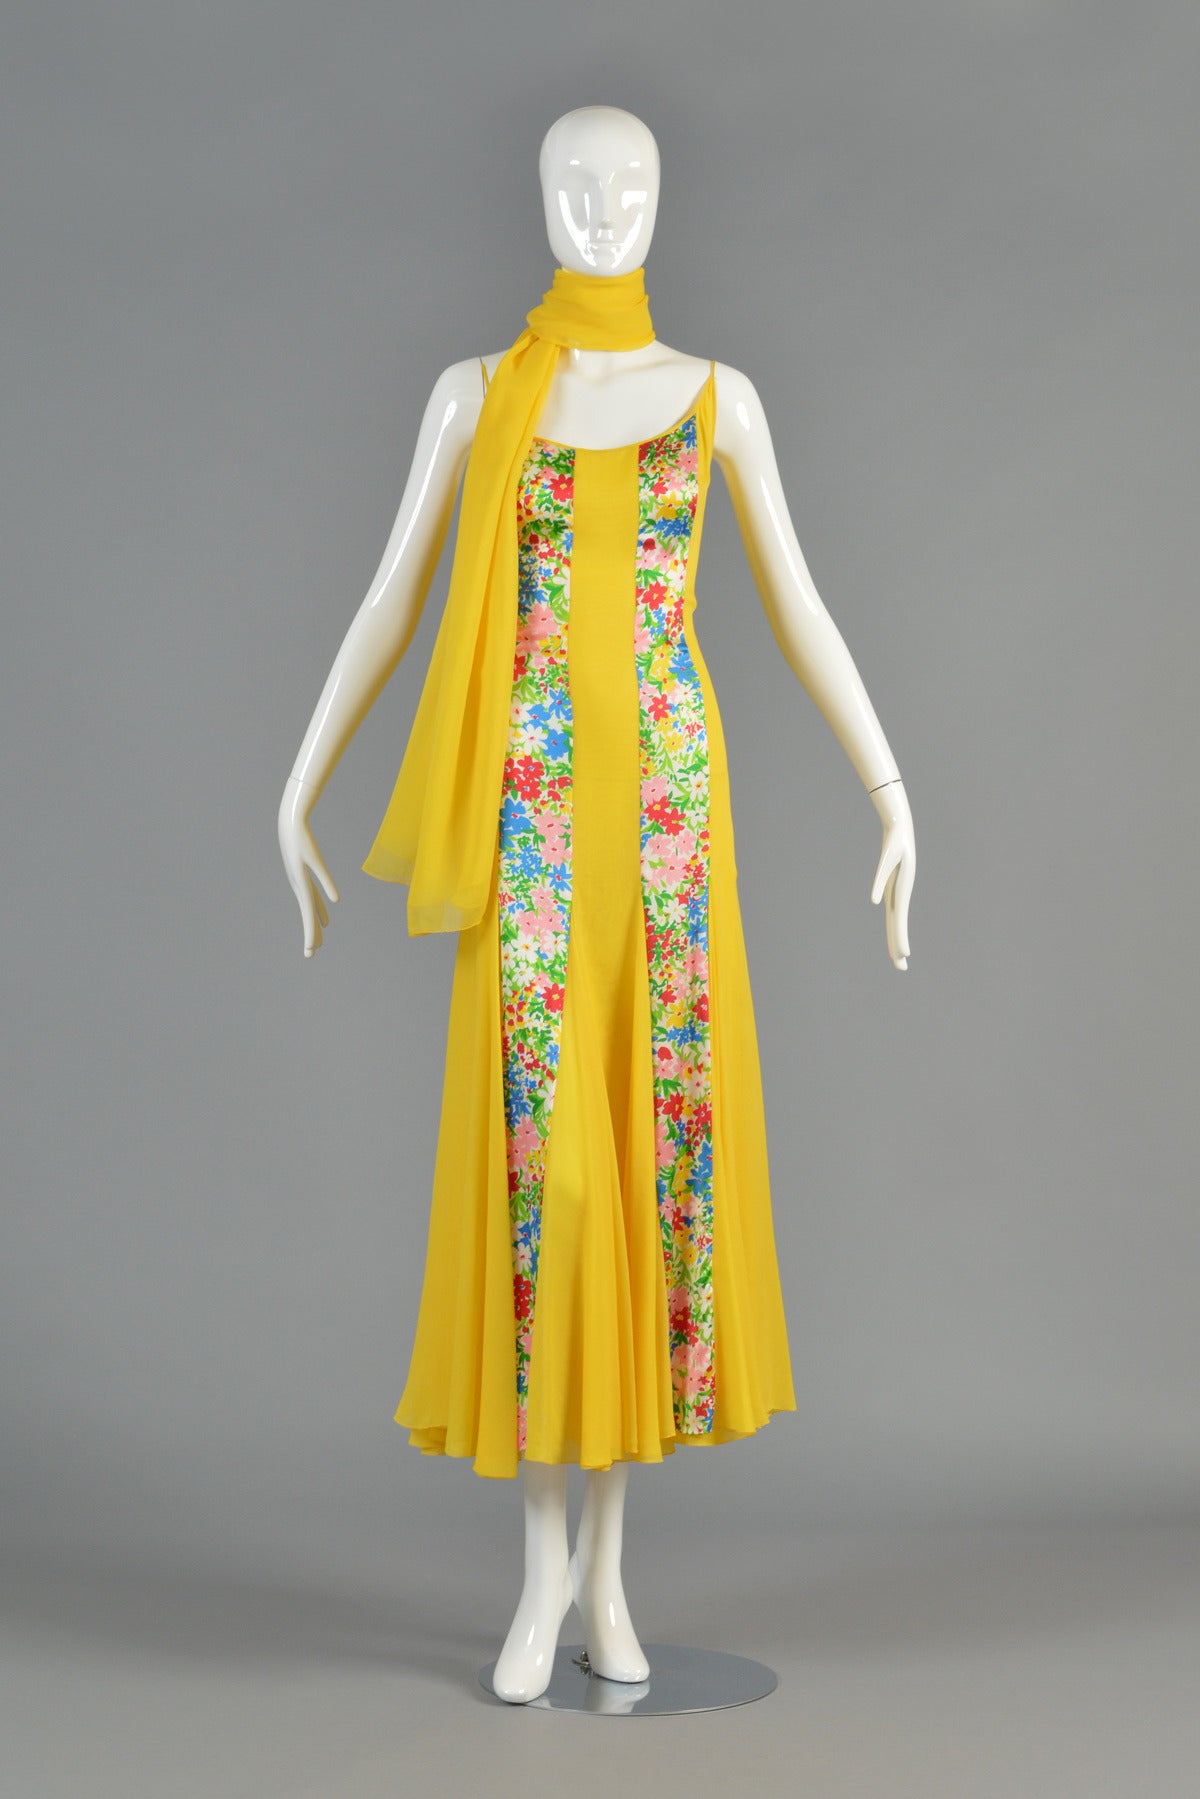 Beautiful 1970's silk chiffon gown by Galanos. Absolutely stunning piece on and yellow is EVERYWHERE this season!

Dress features low scooping neckline with spaghetti straps and massively flared skirt. Bright yellow silk chiffon with inset panels